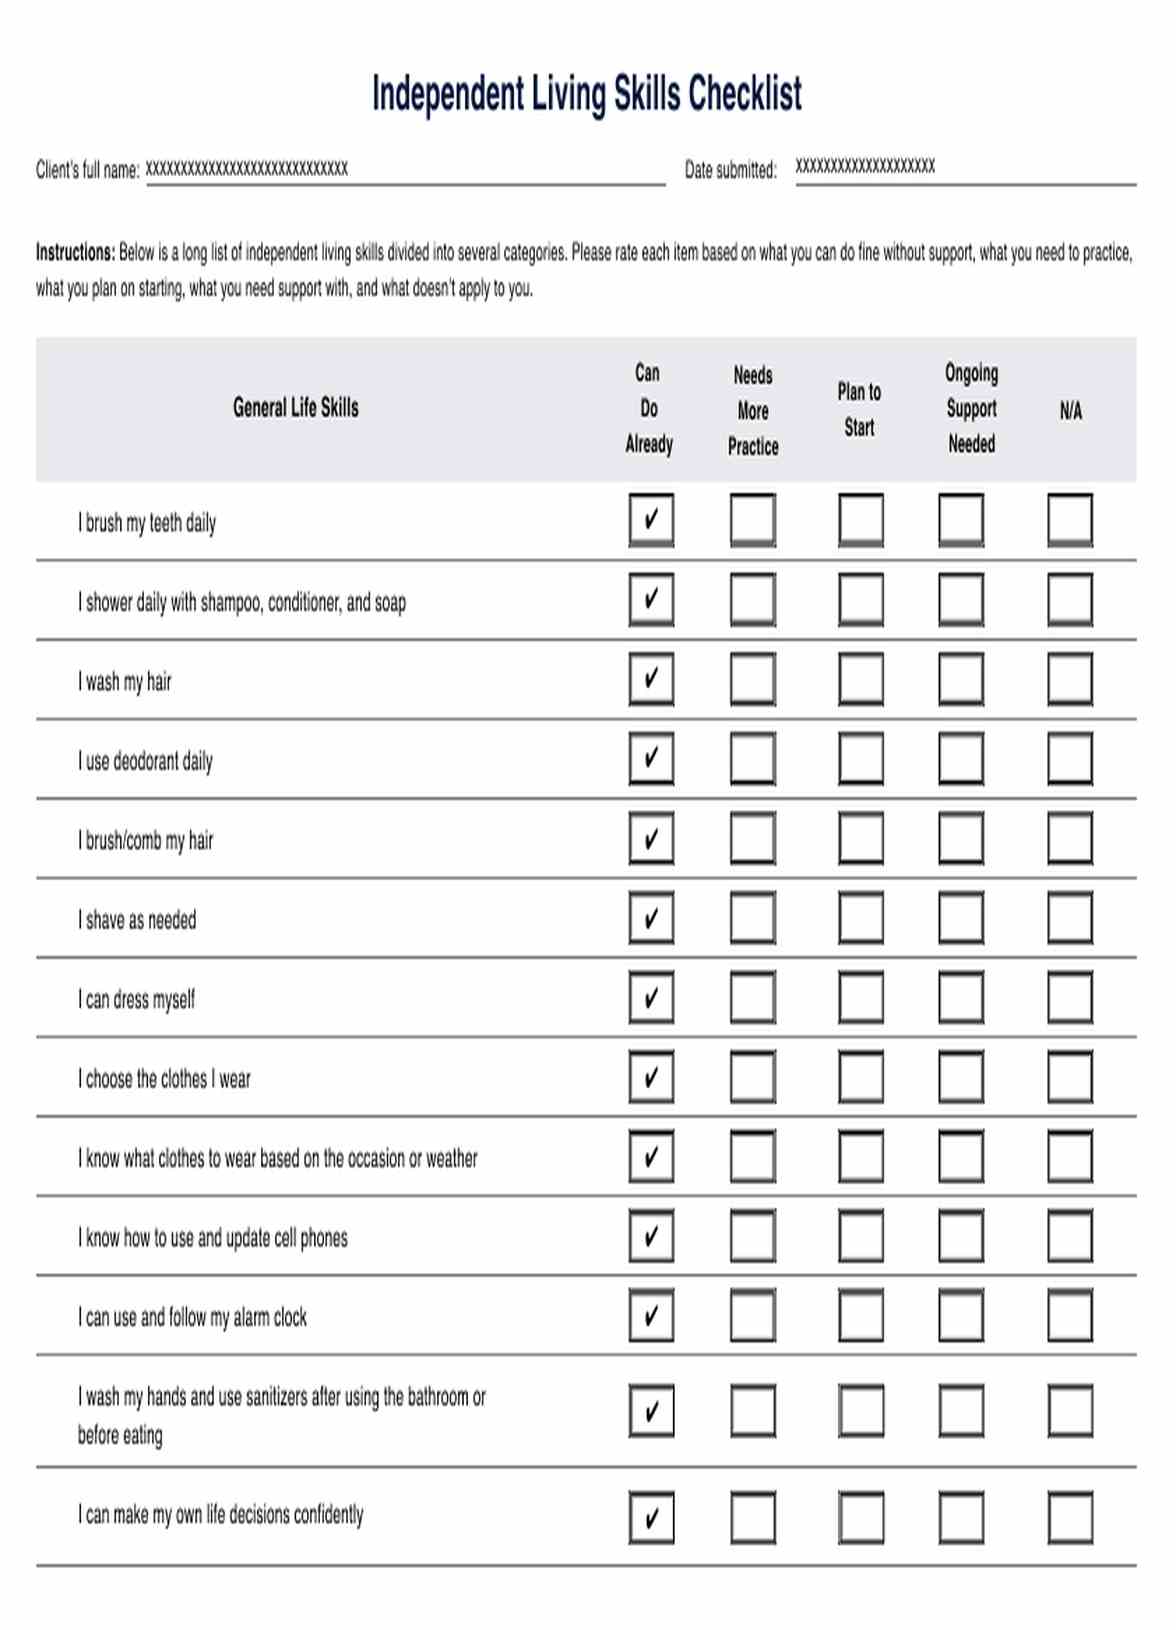 Independent Living Skills Checklist Template PDF Example